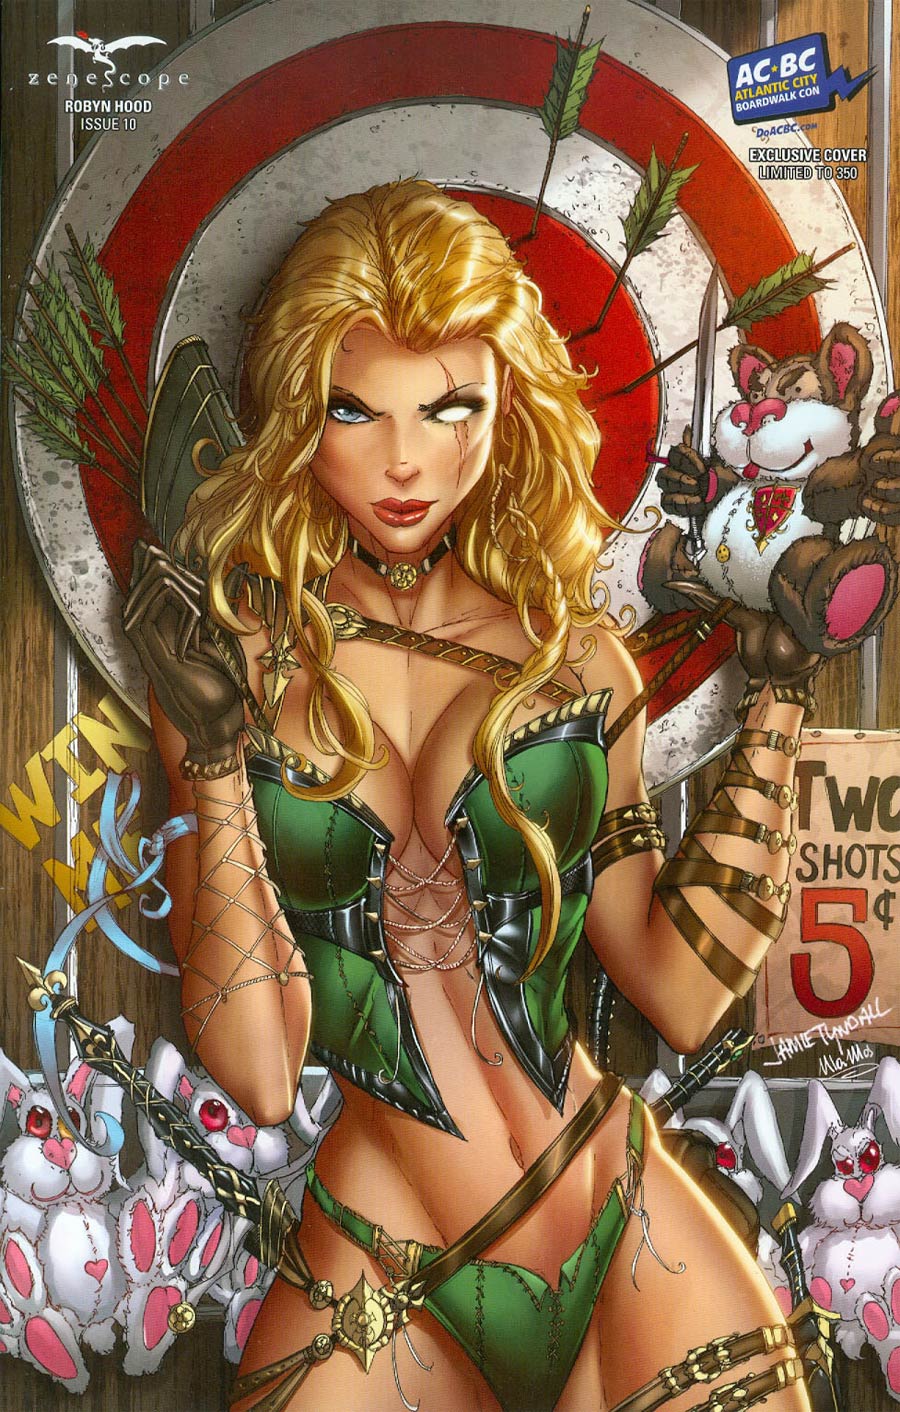 Grimm Fairy Tales Presents Robyn Hood Vol 2 #10 Cover D ACBC 2015 Exclusive Jamie Tyndall Variant Cover